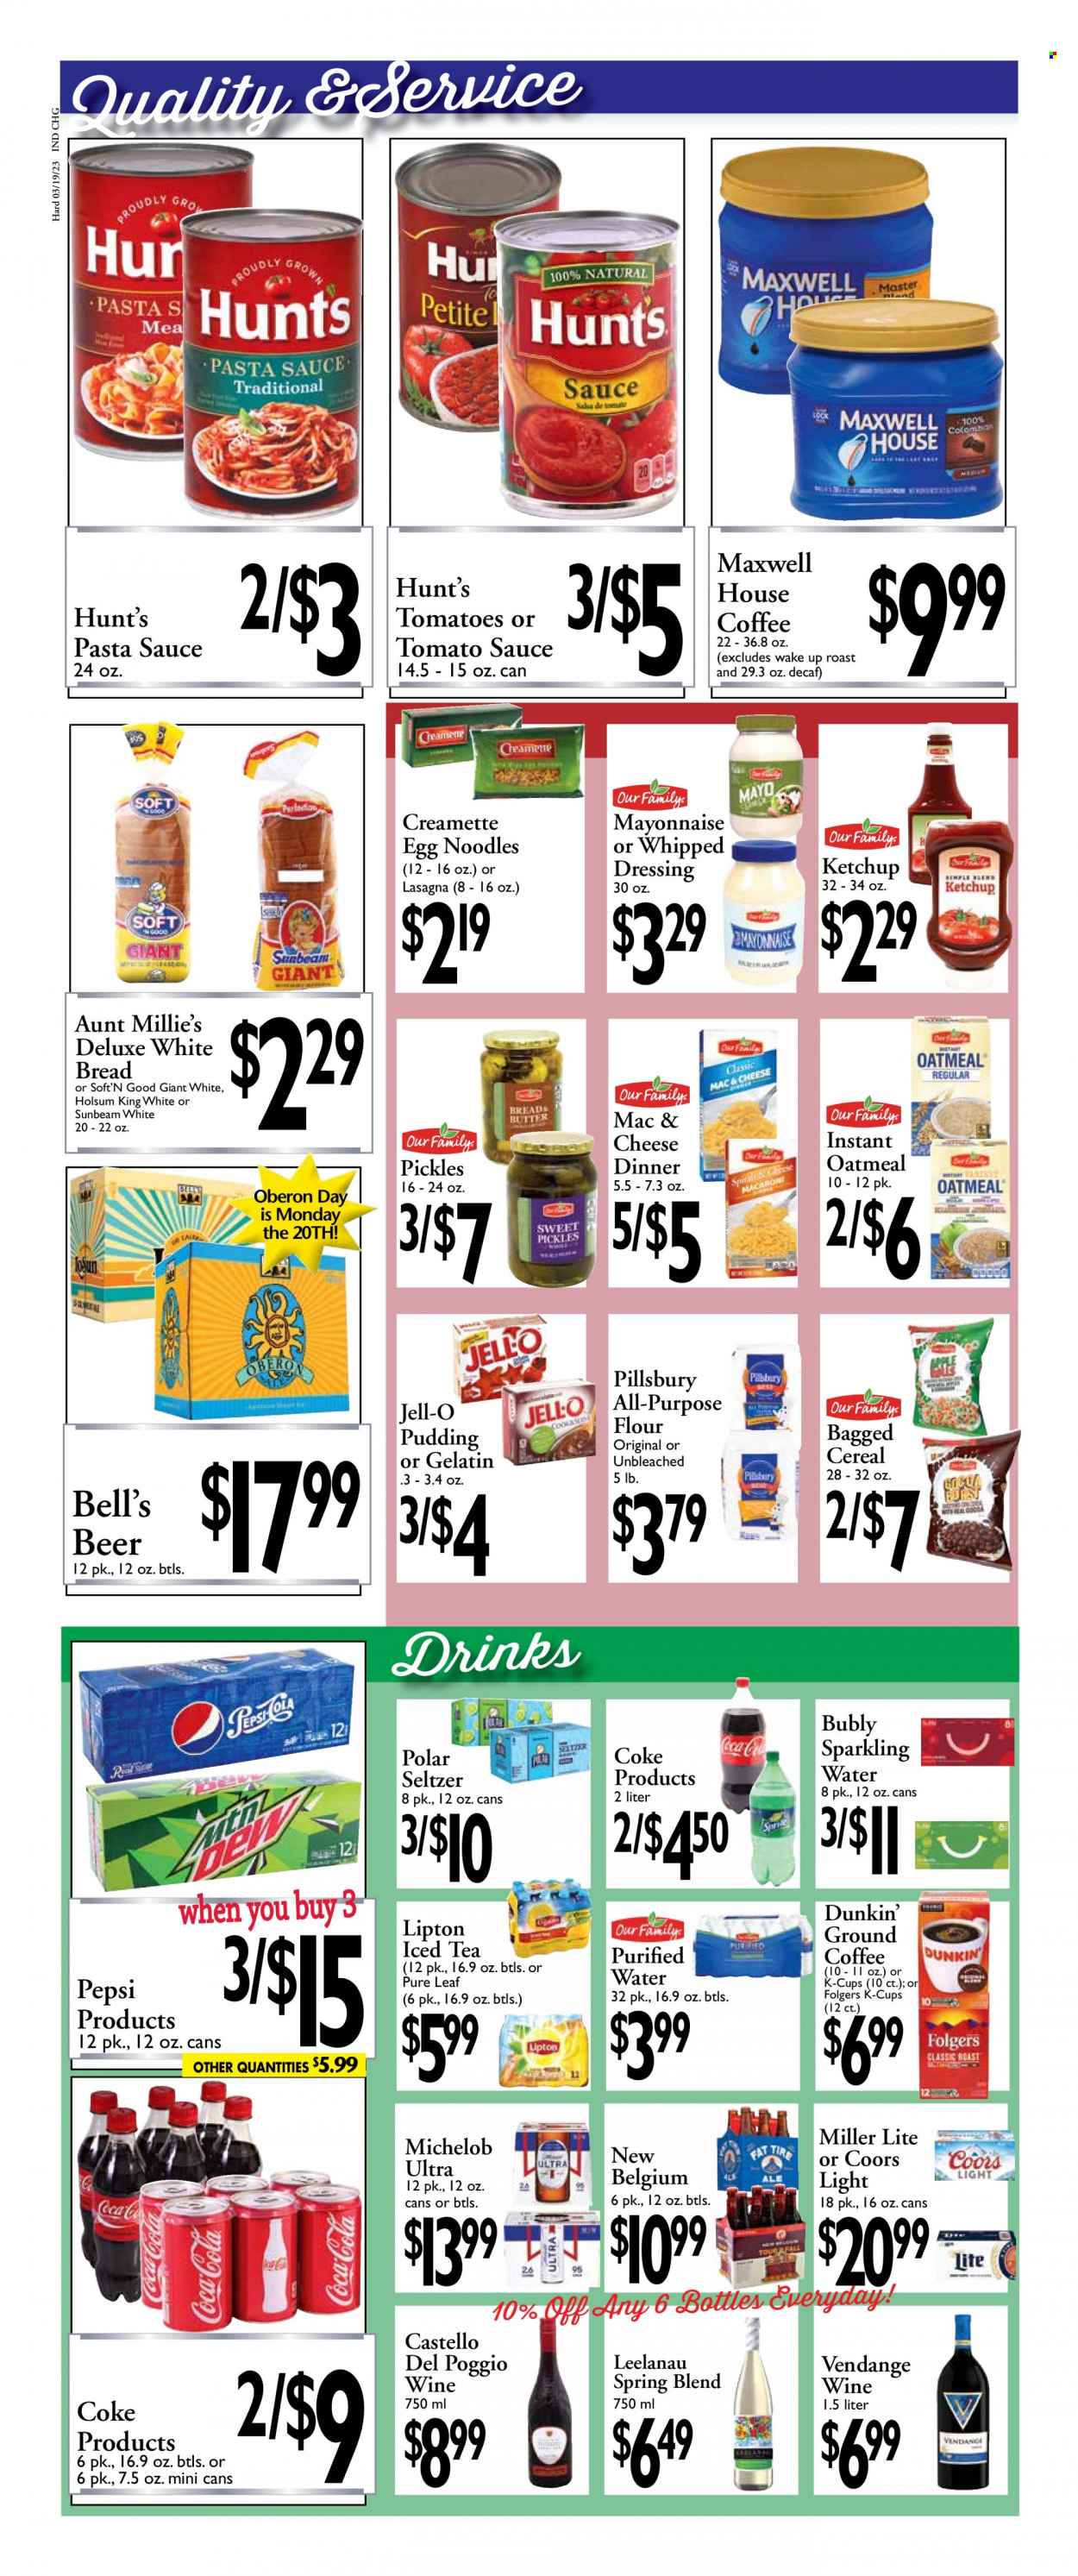 thumbnail - Harding's Markets Flyer - 03/19/2023 - 04/01/2023 - Sales products - bread, white bread, tomatoes, pasta sauce, sauce, Pillsbury, noodles, roast, pudding, mayonnaise, flour, oatmeal, Jell-O, tomato sauce, pickles, cereals, egg noodles, Creamette, ketchup, dressing, Coca-Cola, Pepsi, Lipton, ice tea, Coke, seltzer water, sparkling water, purified water, water, Maxwell House, Pure Leaf, coffee, Folgers, ground coffee, coffee capsules, K-Cups, Vendange, beer, Miller Lite, Coors, Michelob. Page 4.